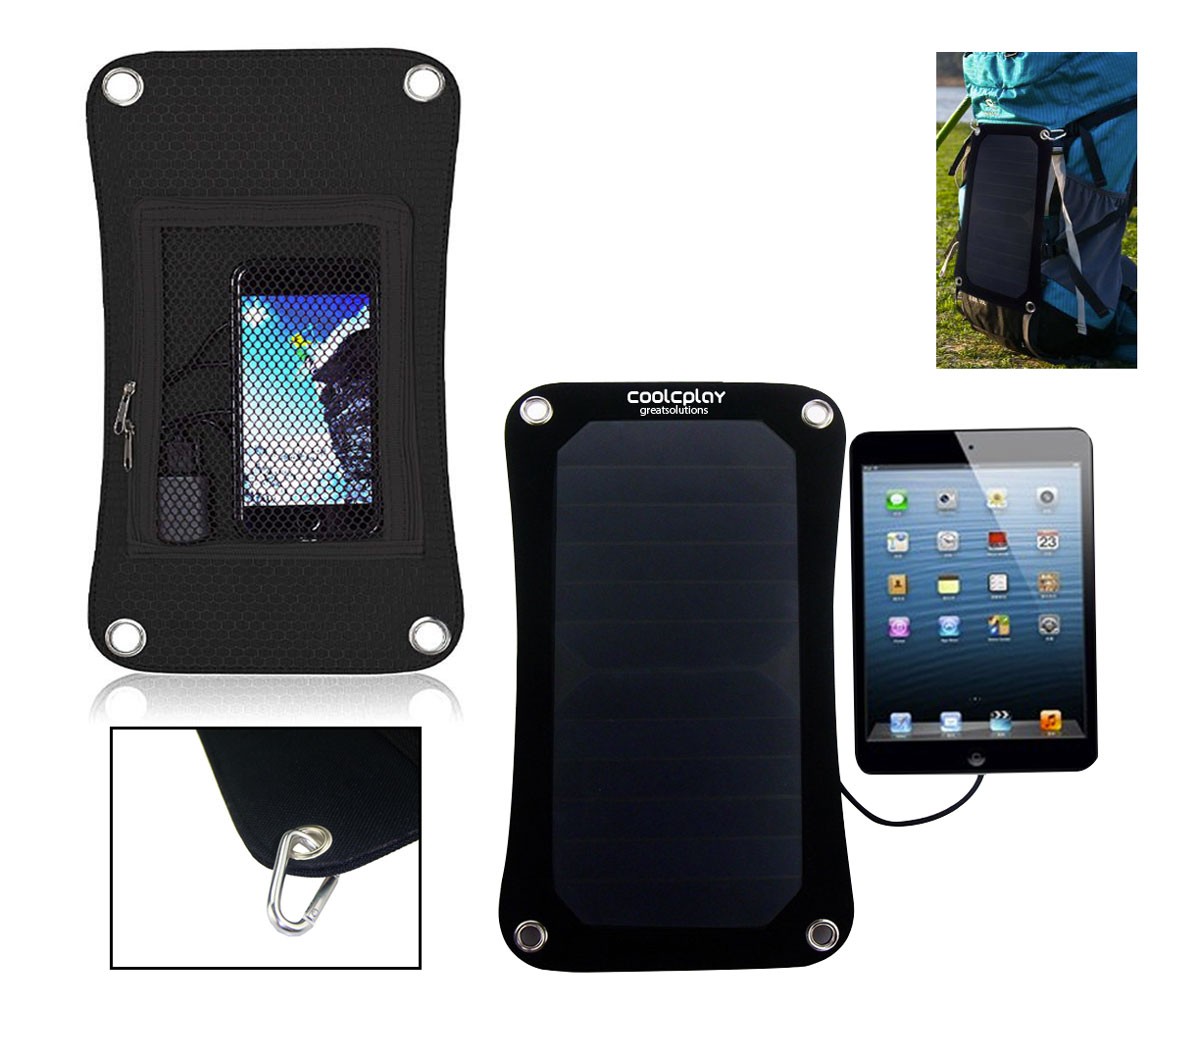 Attachable Solar Panel Charger For Backpacks